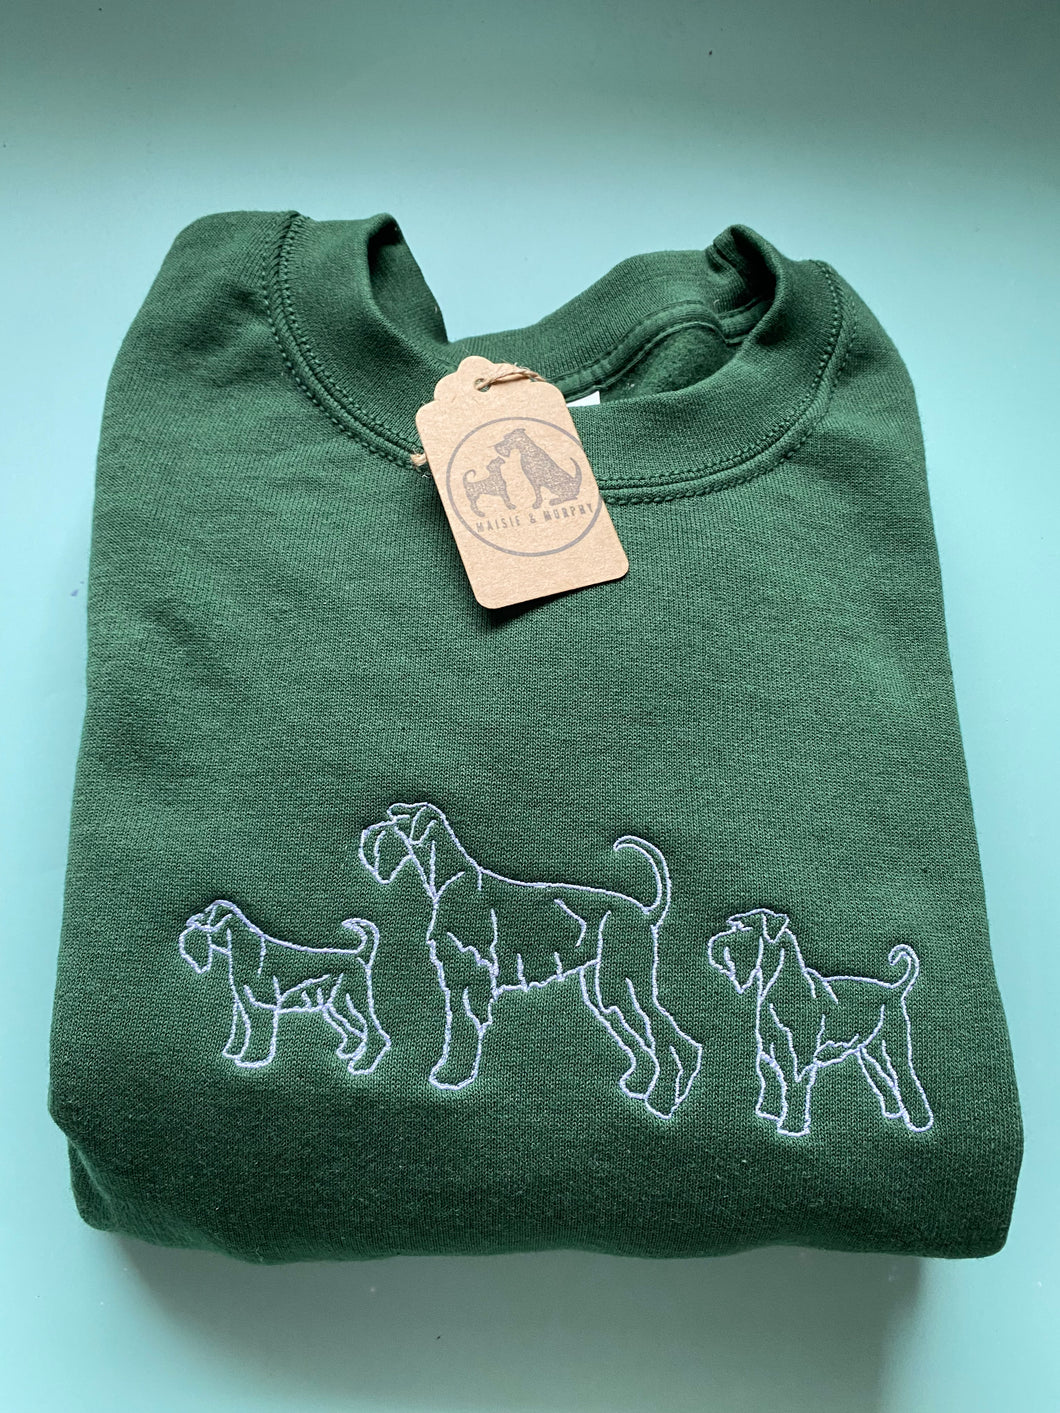 Embroidered Schnauzer Trio Sweatshirt - For Miniature, Standard and Giant schnauzer owners